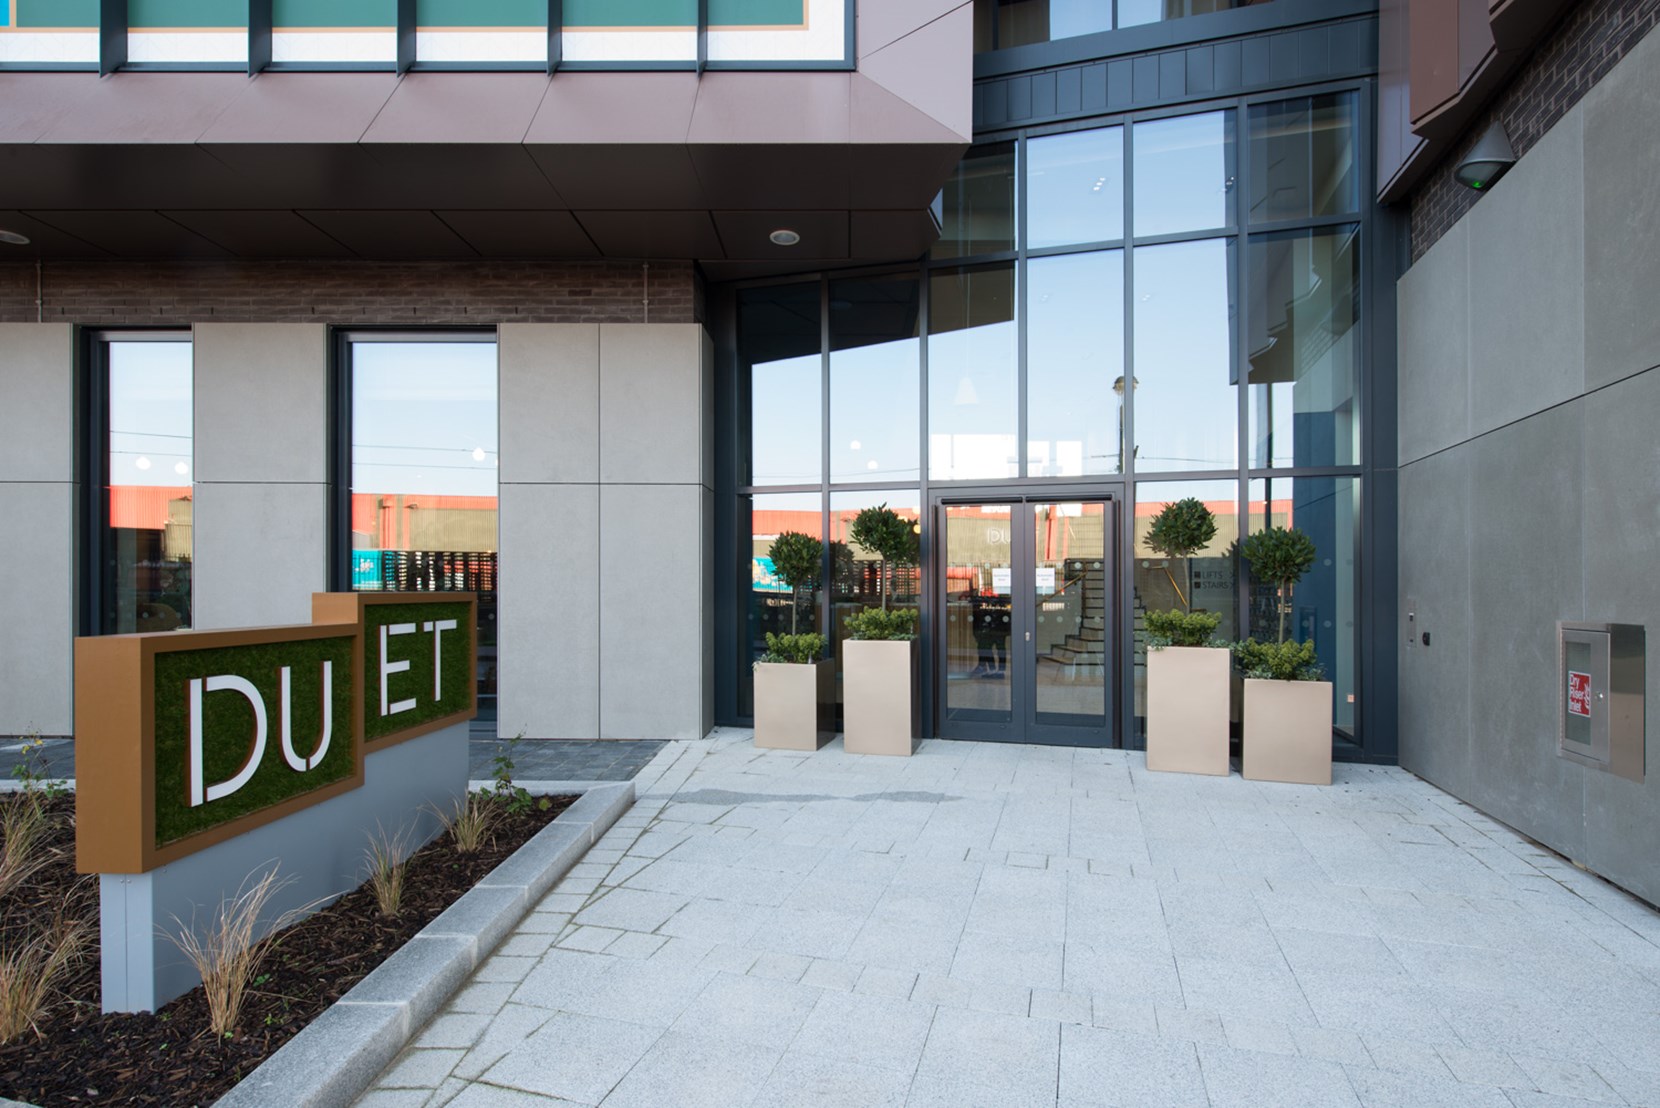 Apartments to Rent by JLL at Duet, Salford, M50, development entrance